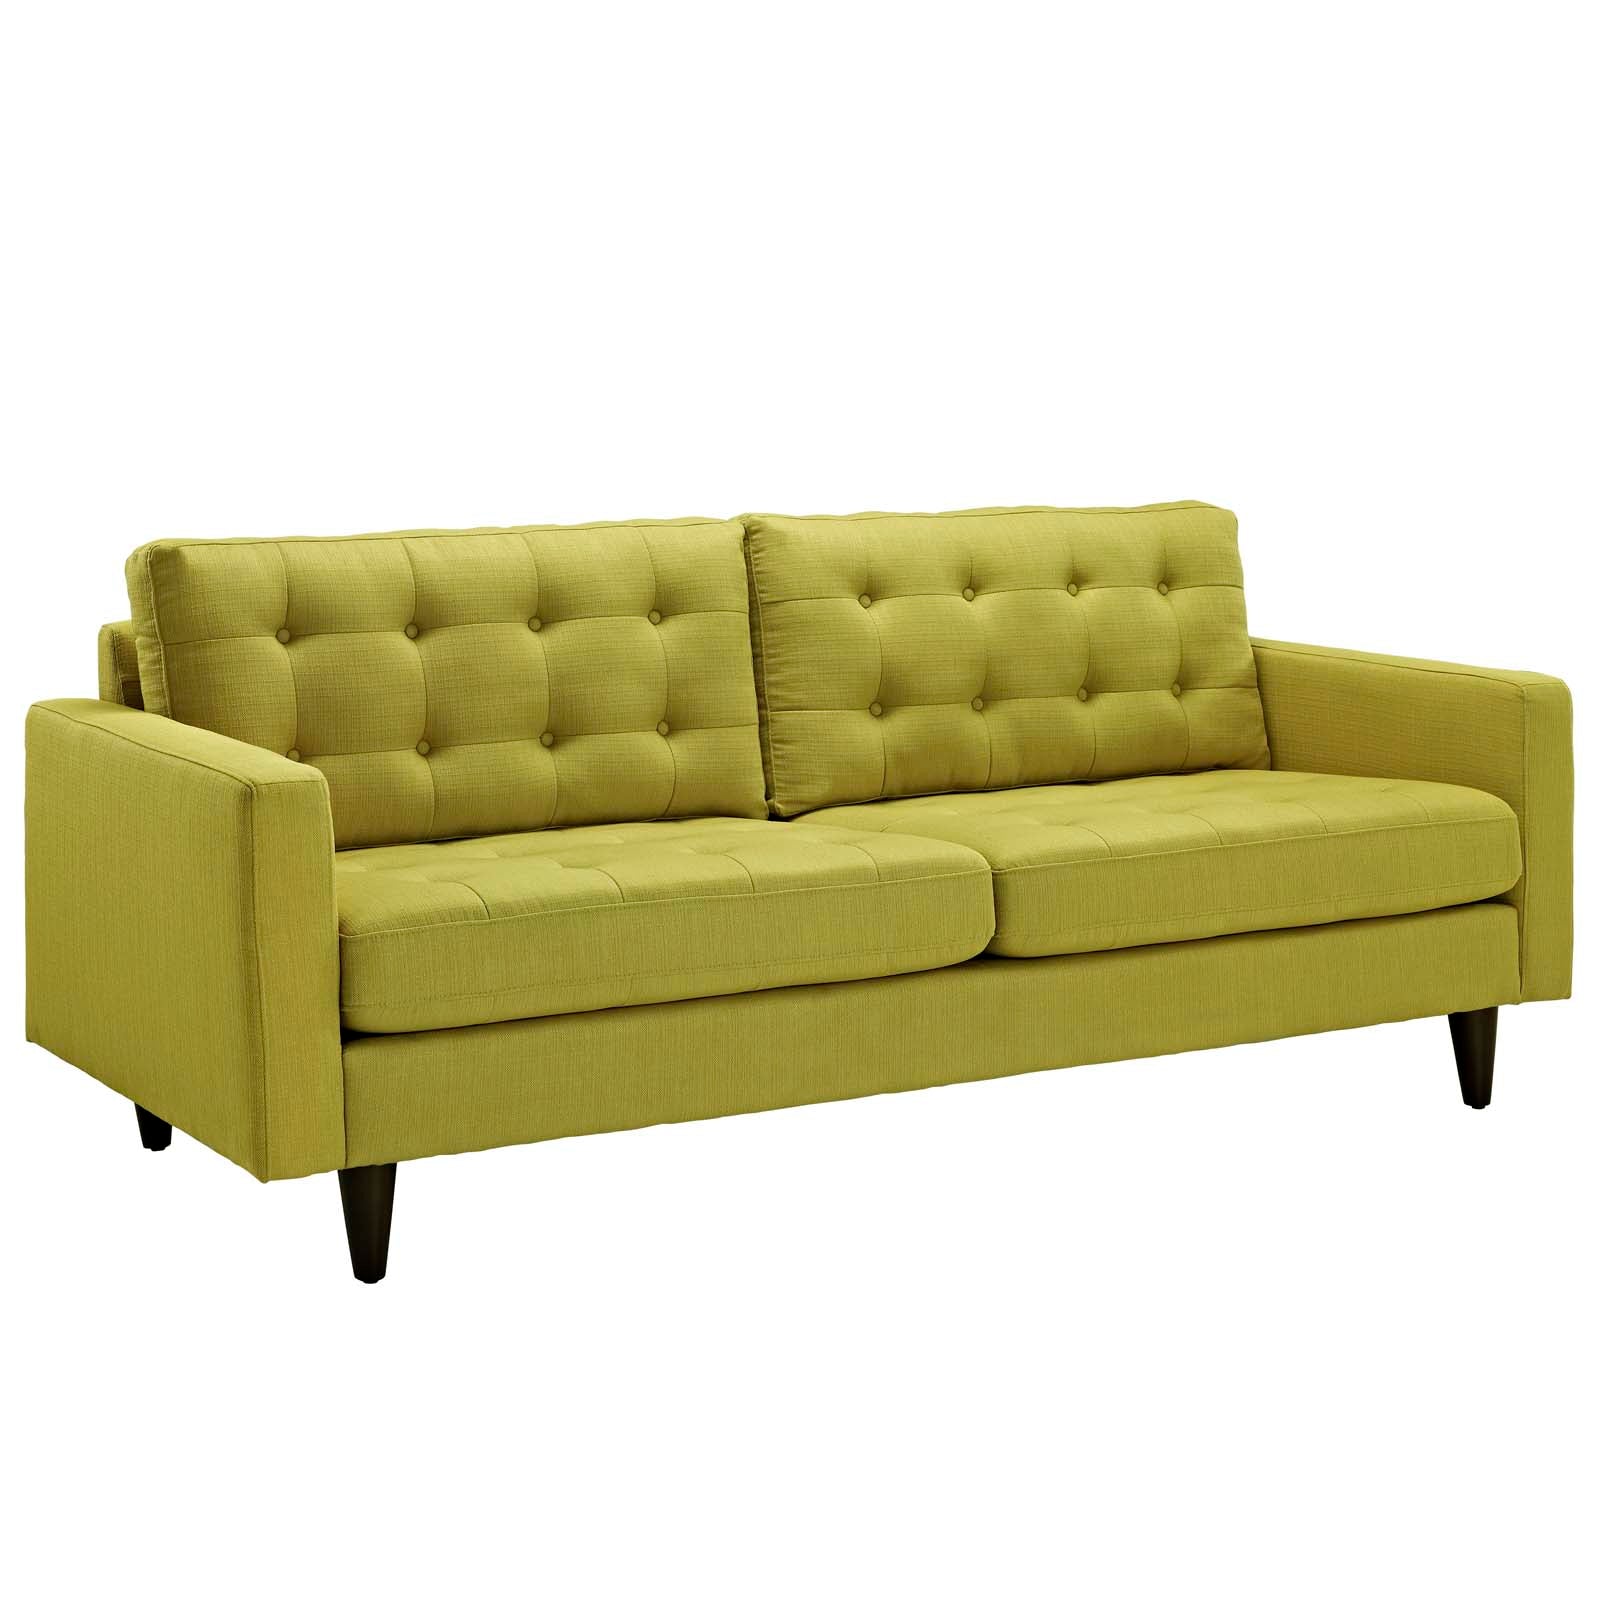 Modway Sofas & Couches - Empress Upholstered Fabric Sofa Wheatgrass